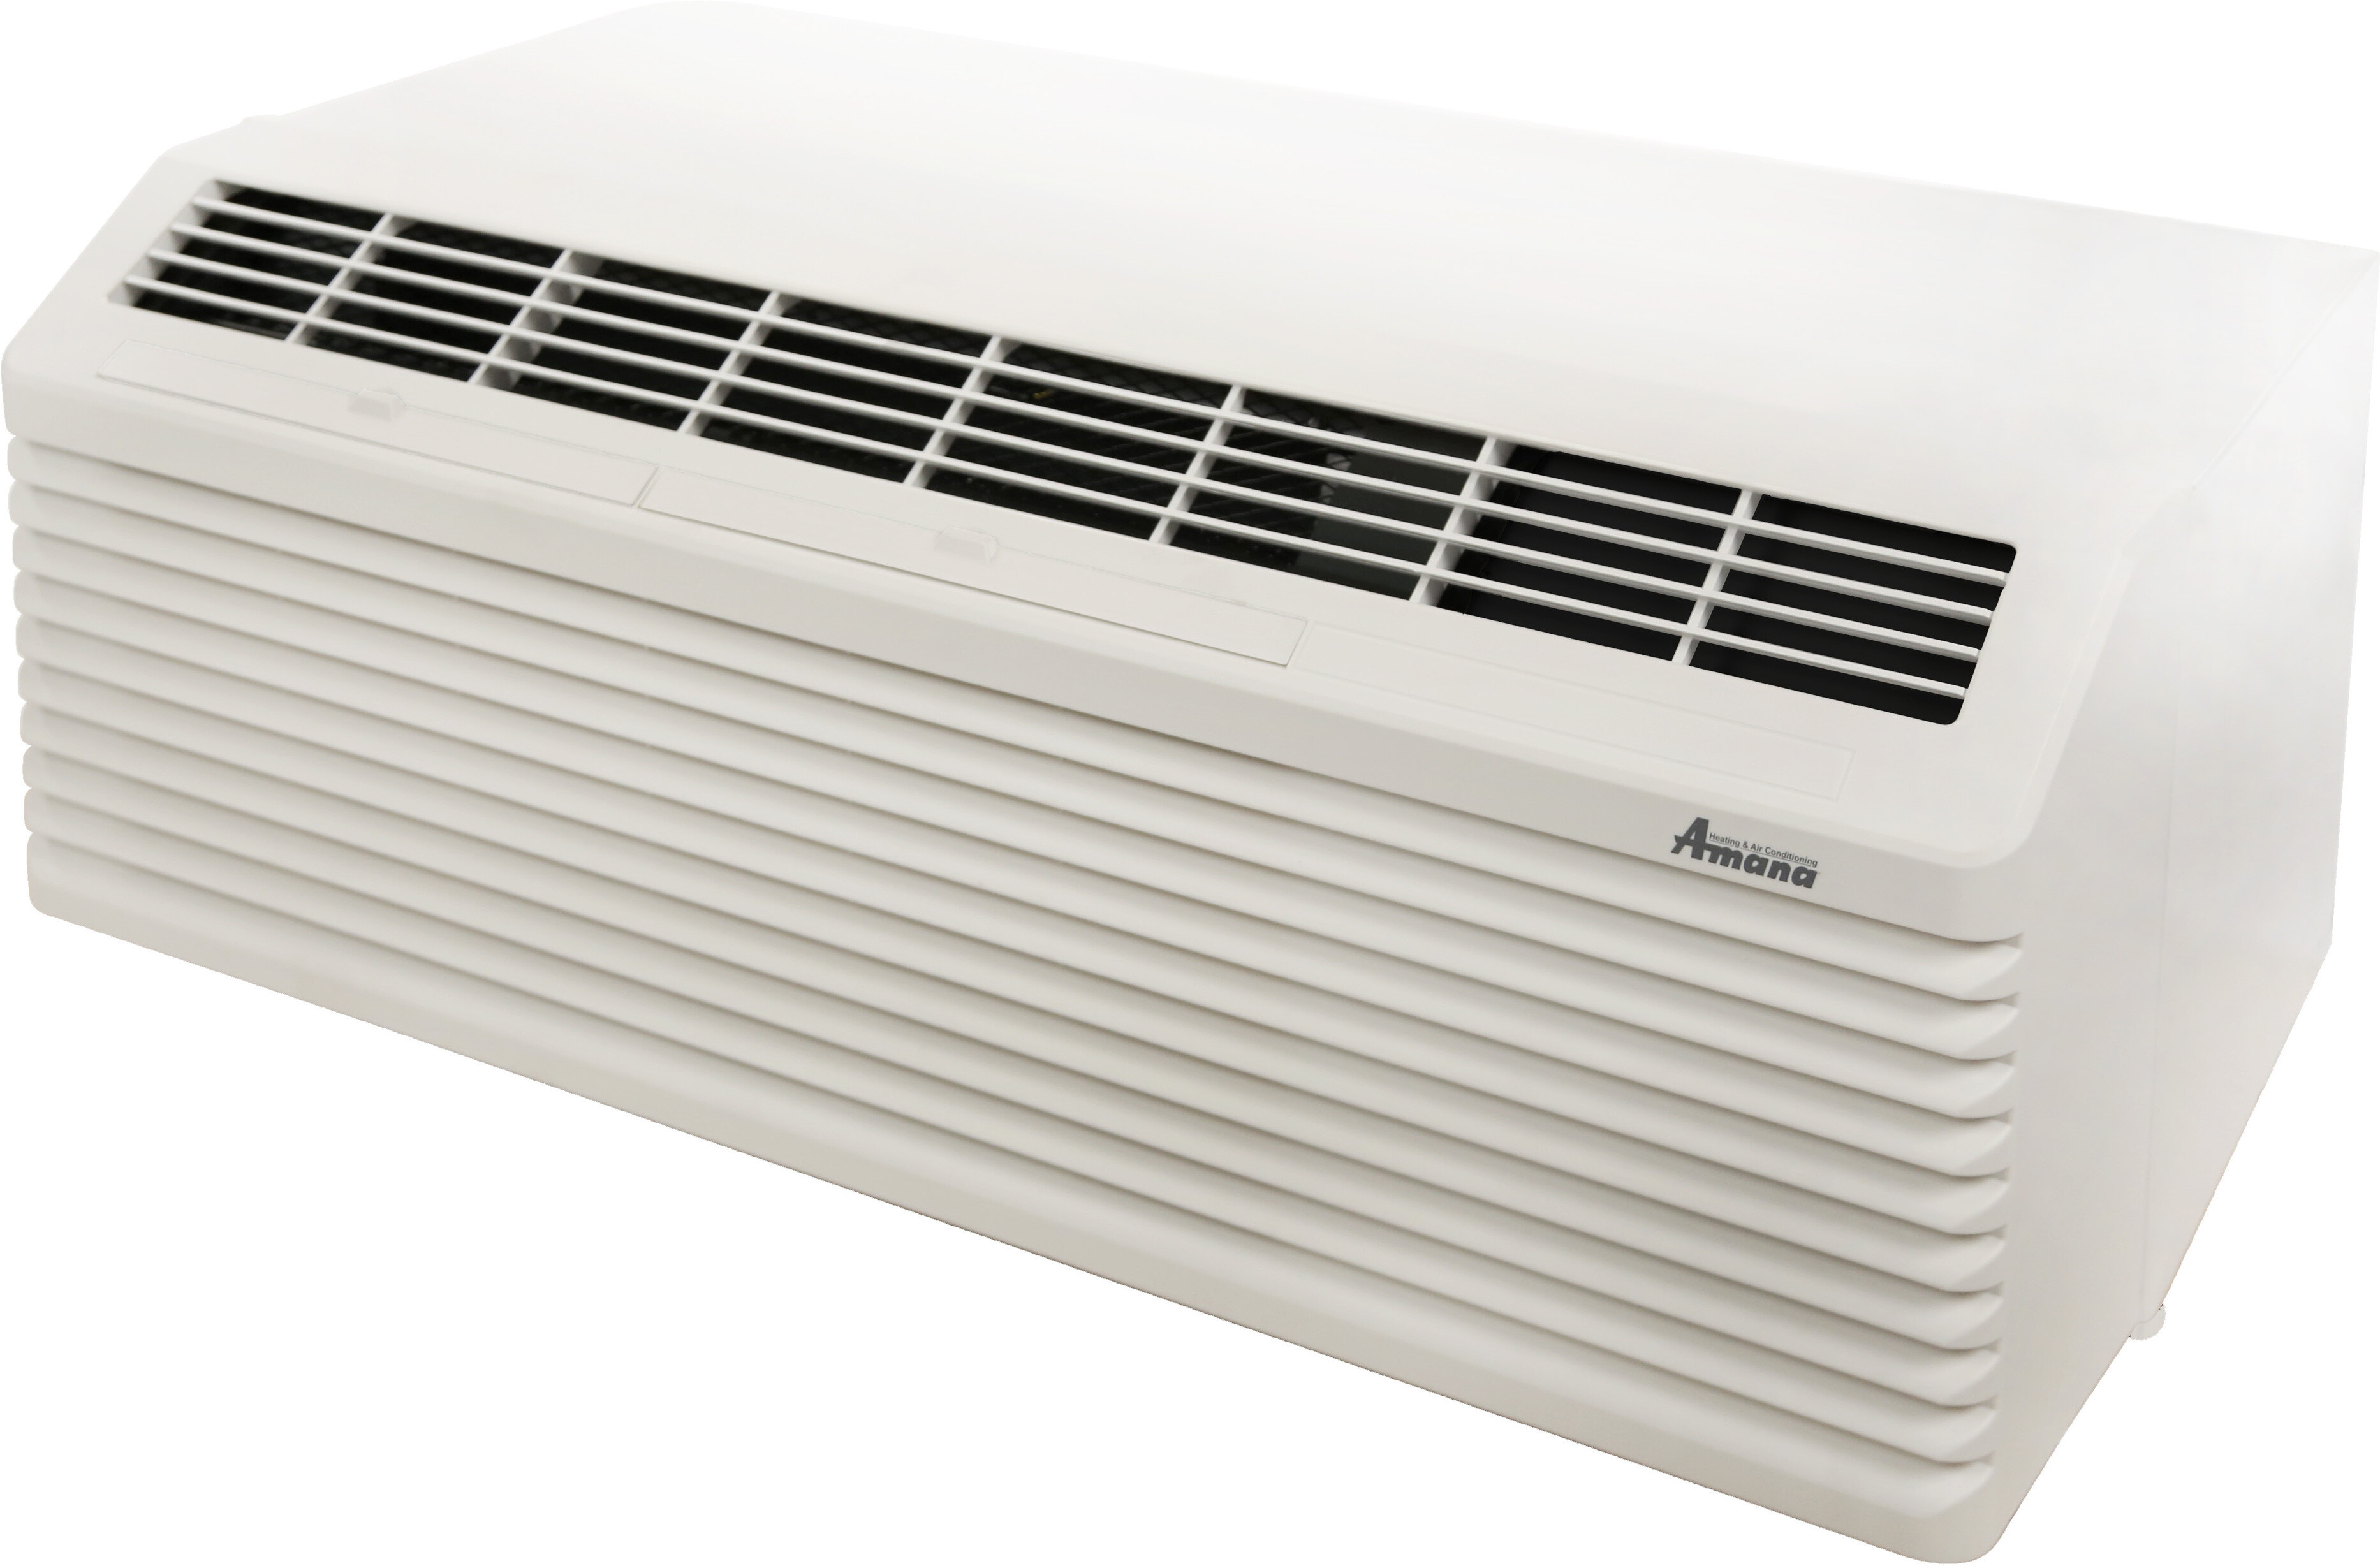 We service most AC brands and models near Carol Stream IL.